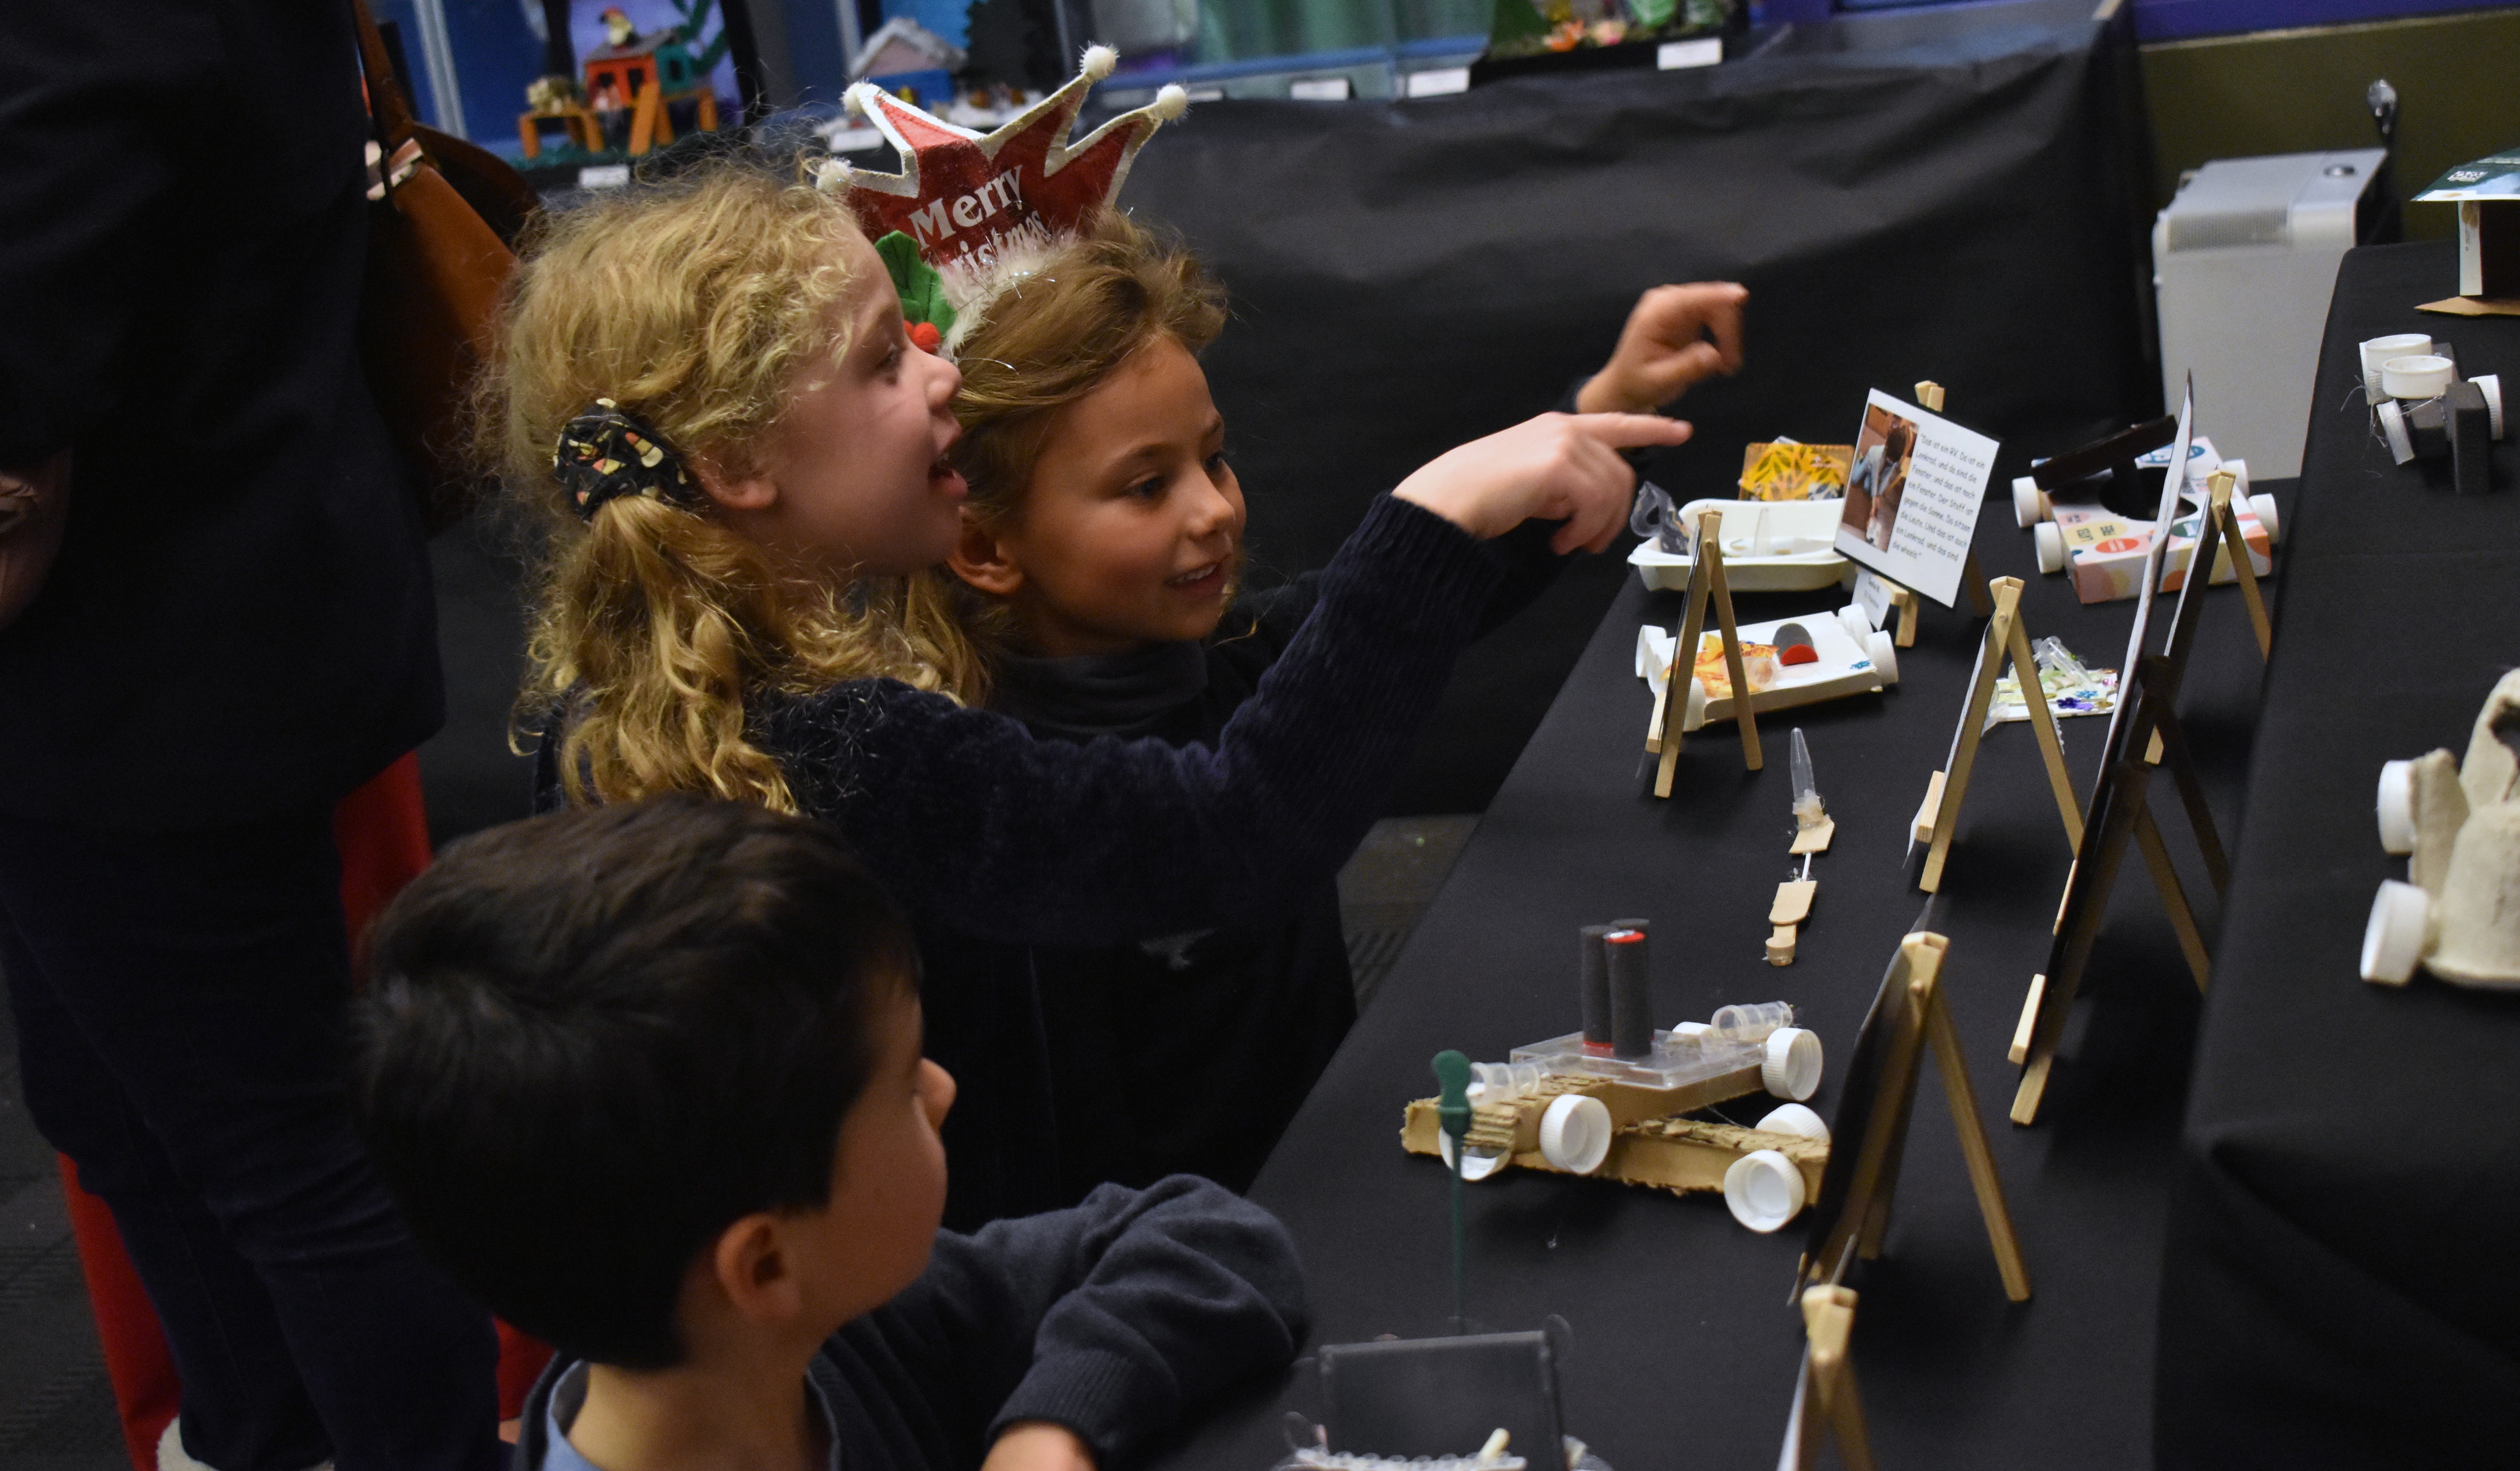 Three young students interacting with one of the displays.